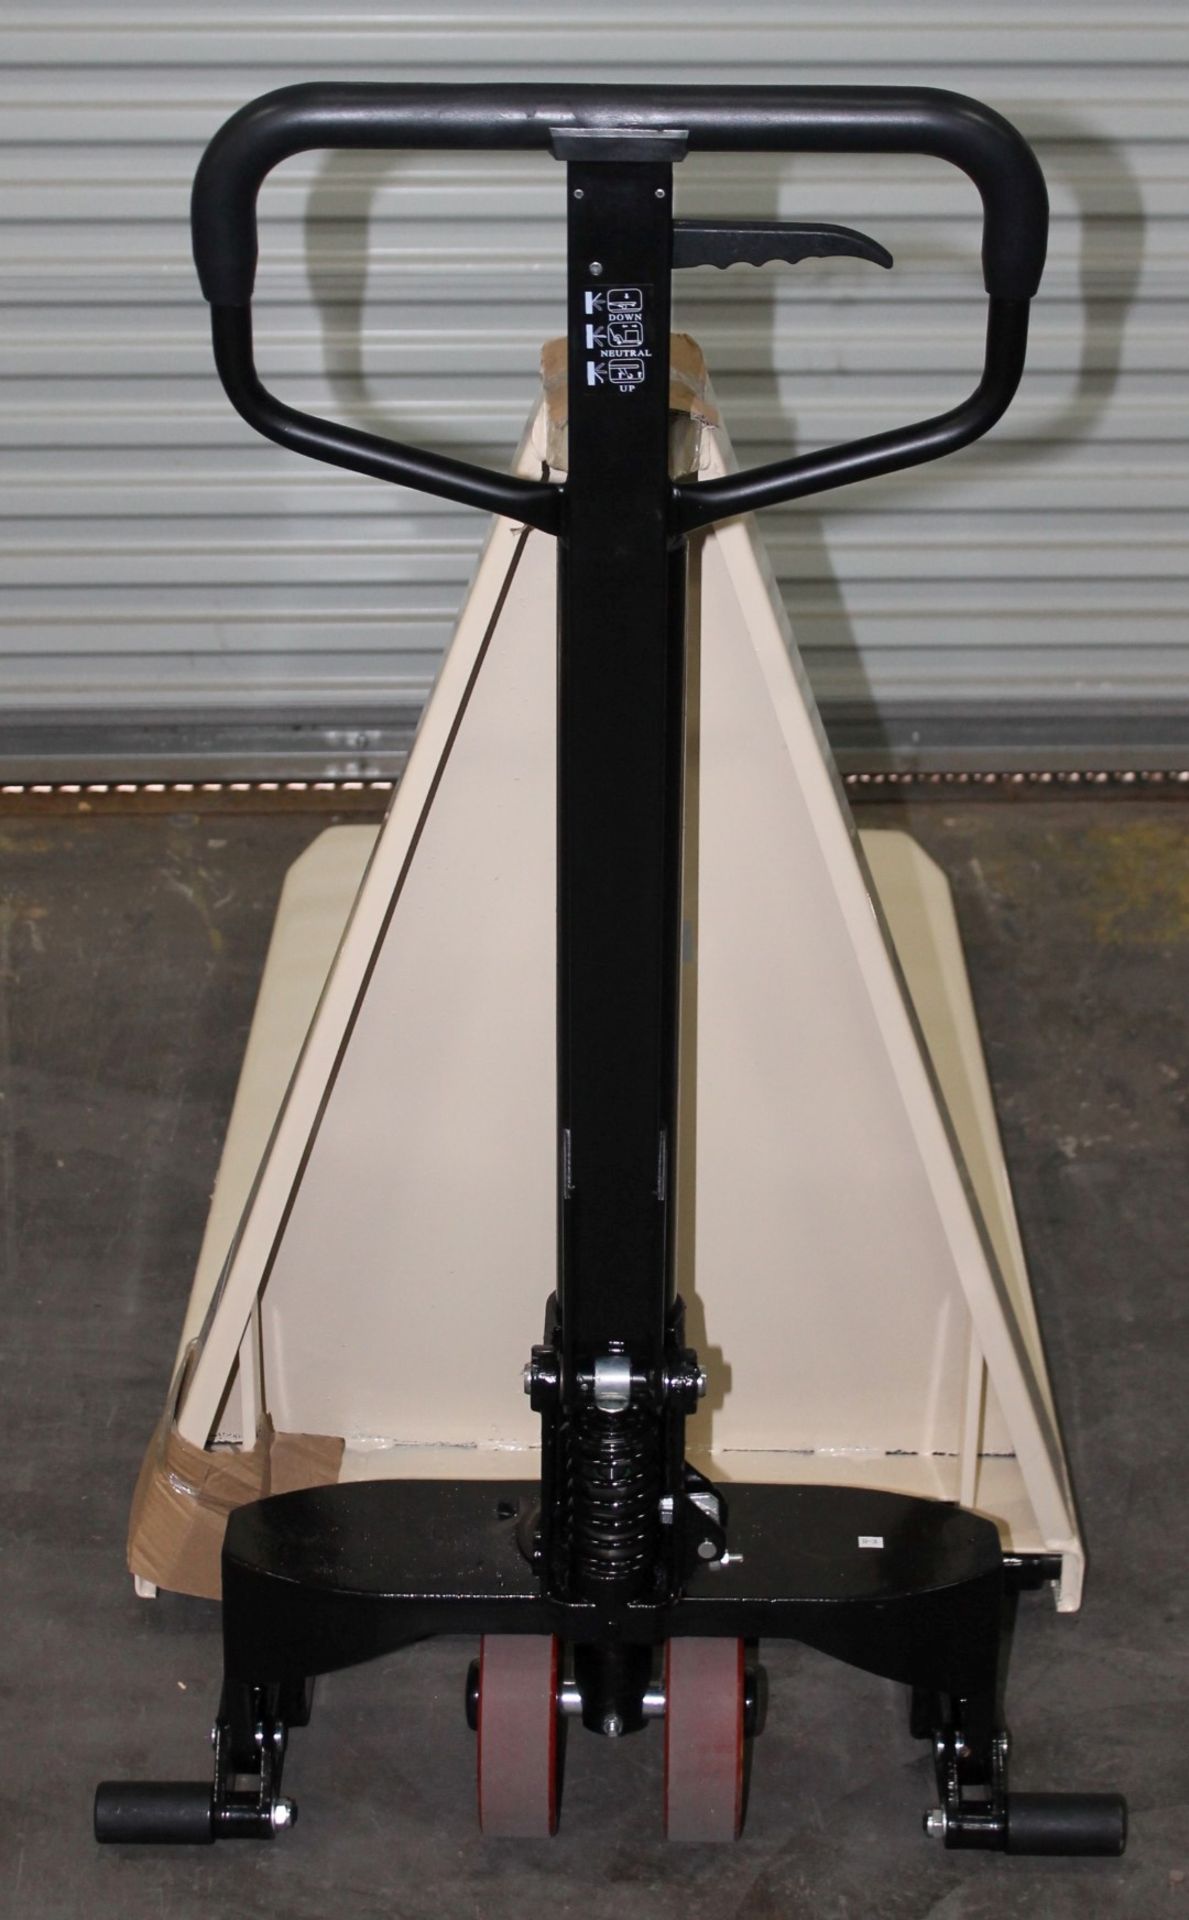 HIGH LIFT PALLET TRUCK,  CAPACITY: 2200 lb, FORK SIZE: 27" x 48", LOWERED FORK HEIGHT: 3.35 - Image 5 of 5